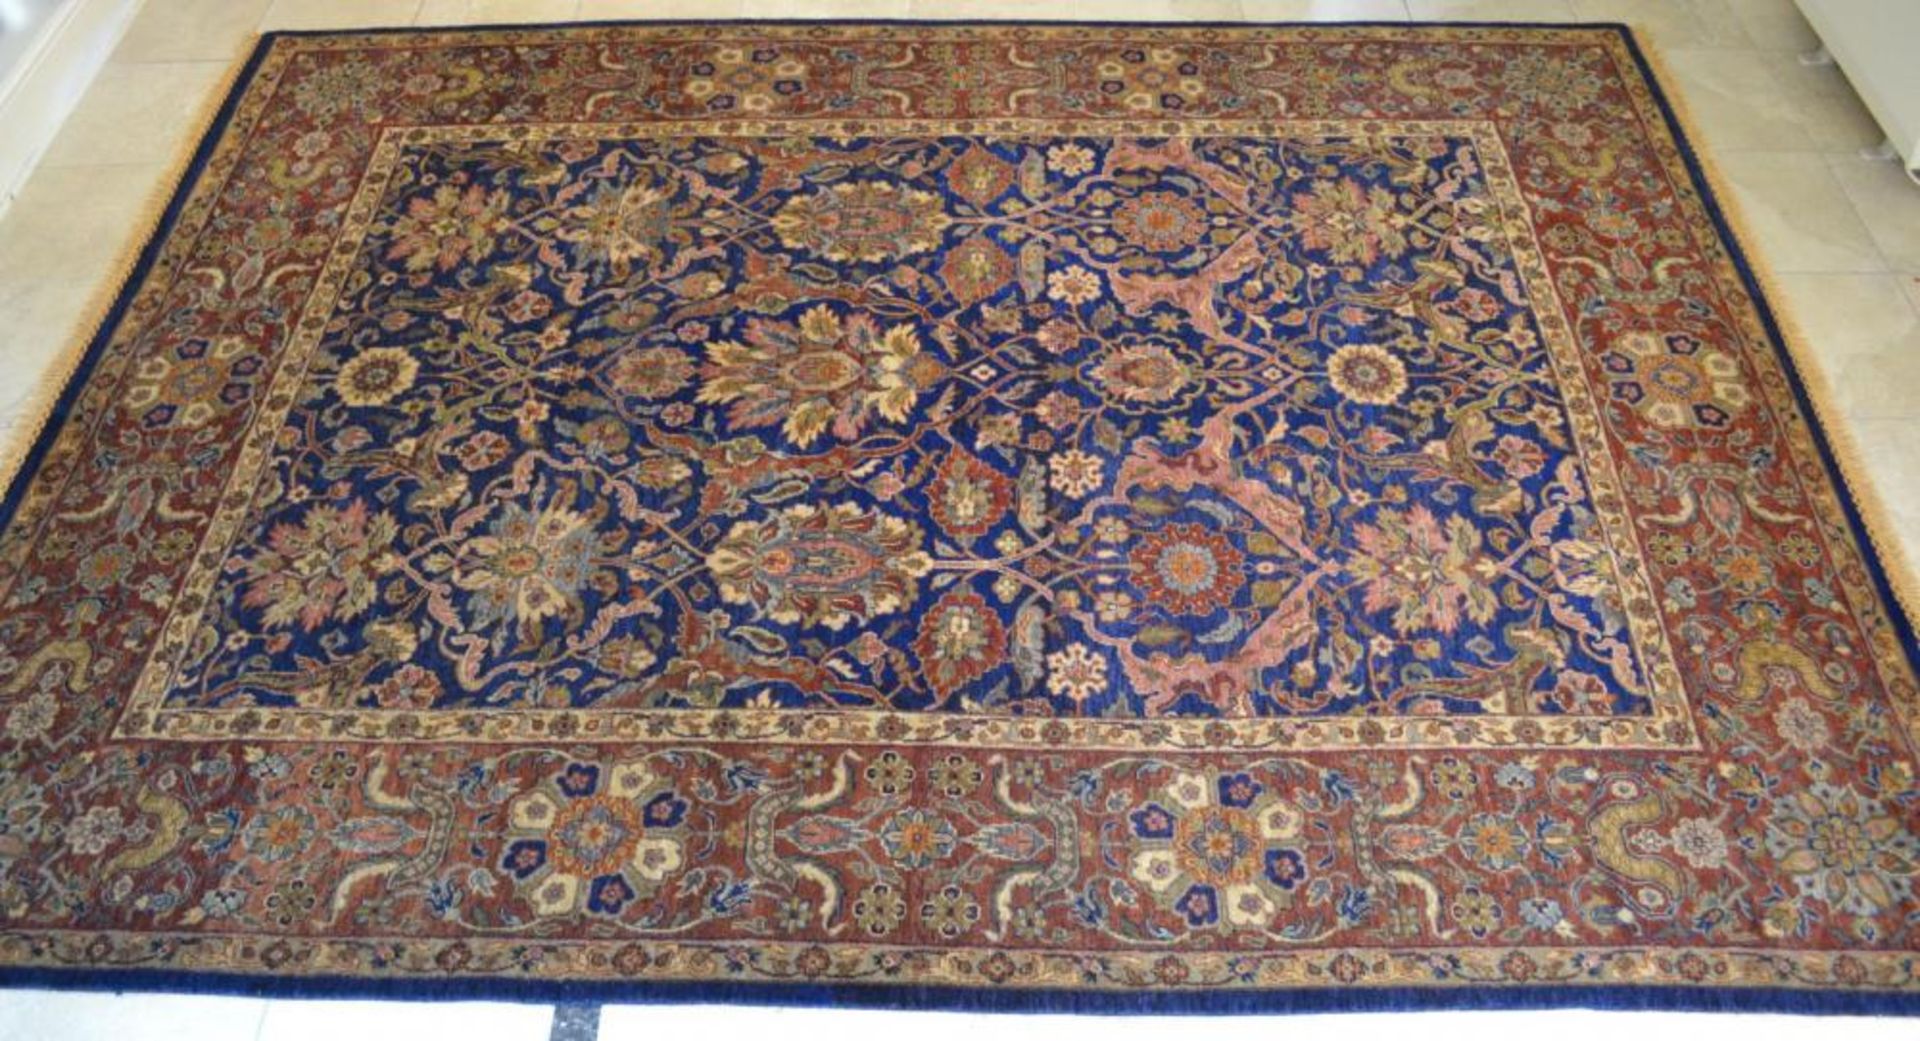 1 x Fine Indian Vegetable Dyed Handmade Carpet in Navy and Rust - All Wool With Cotton Foundation - - Image 22 of 22